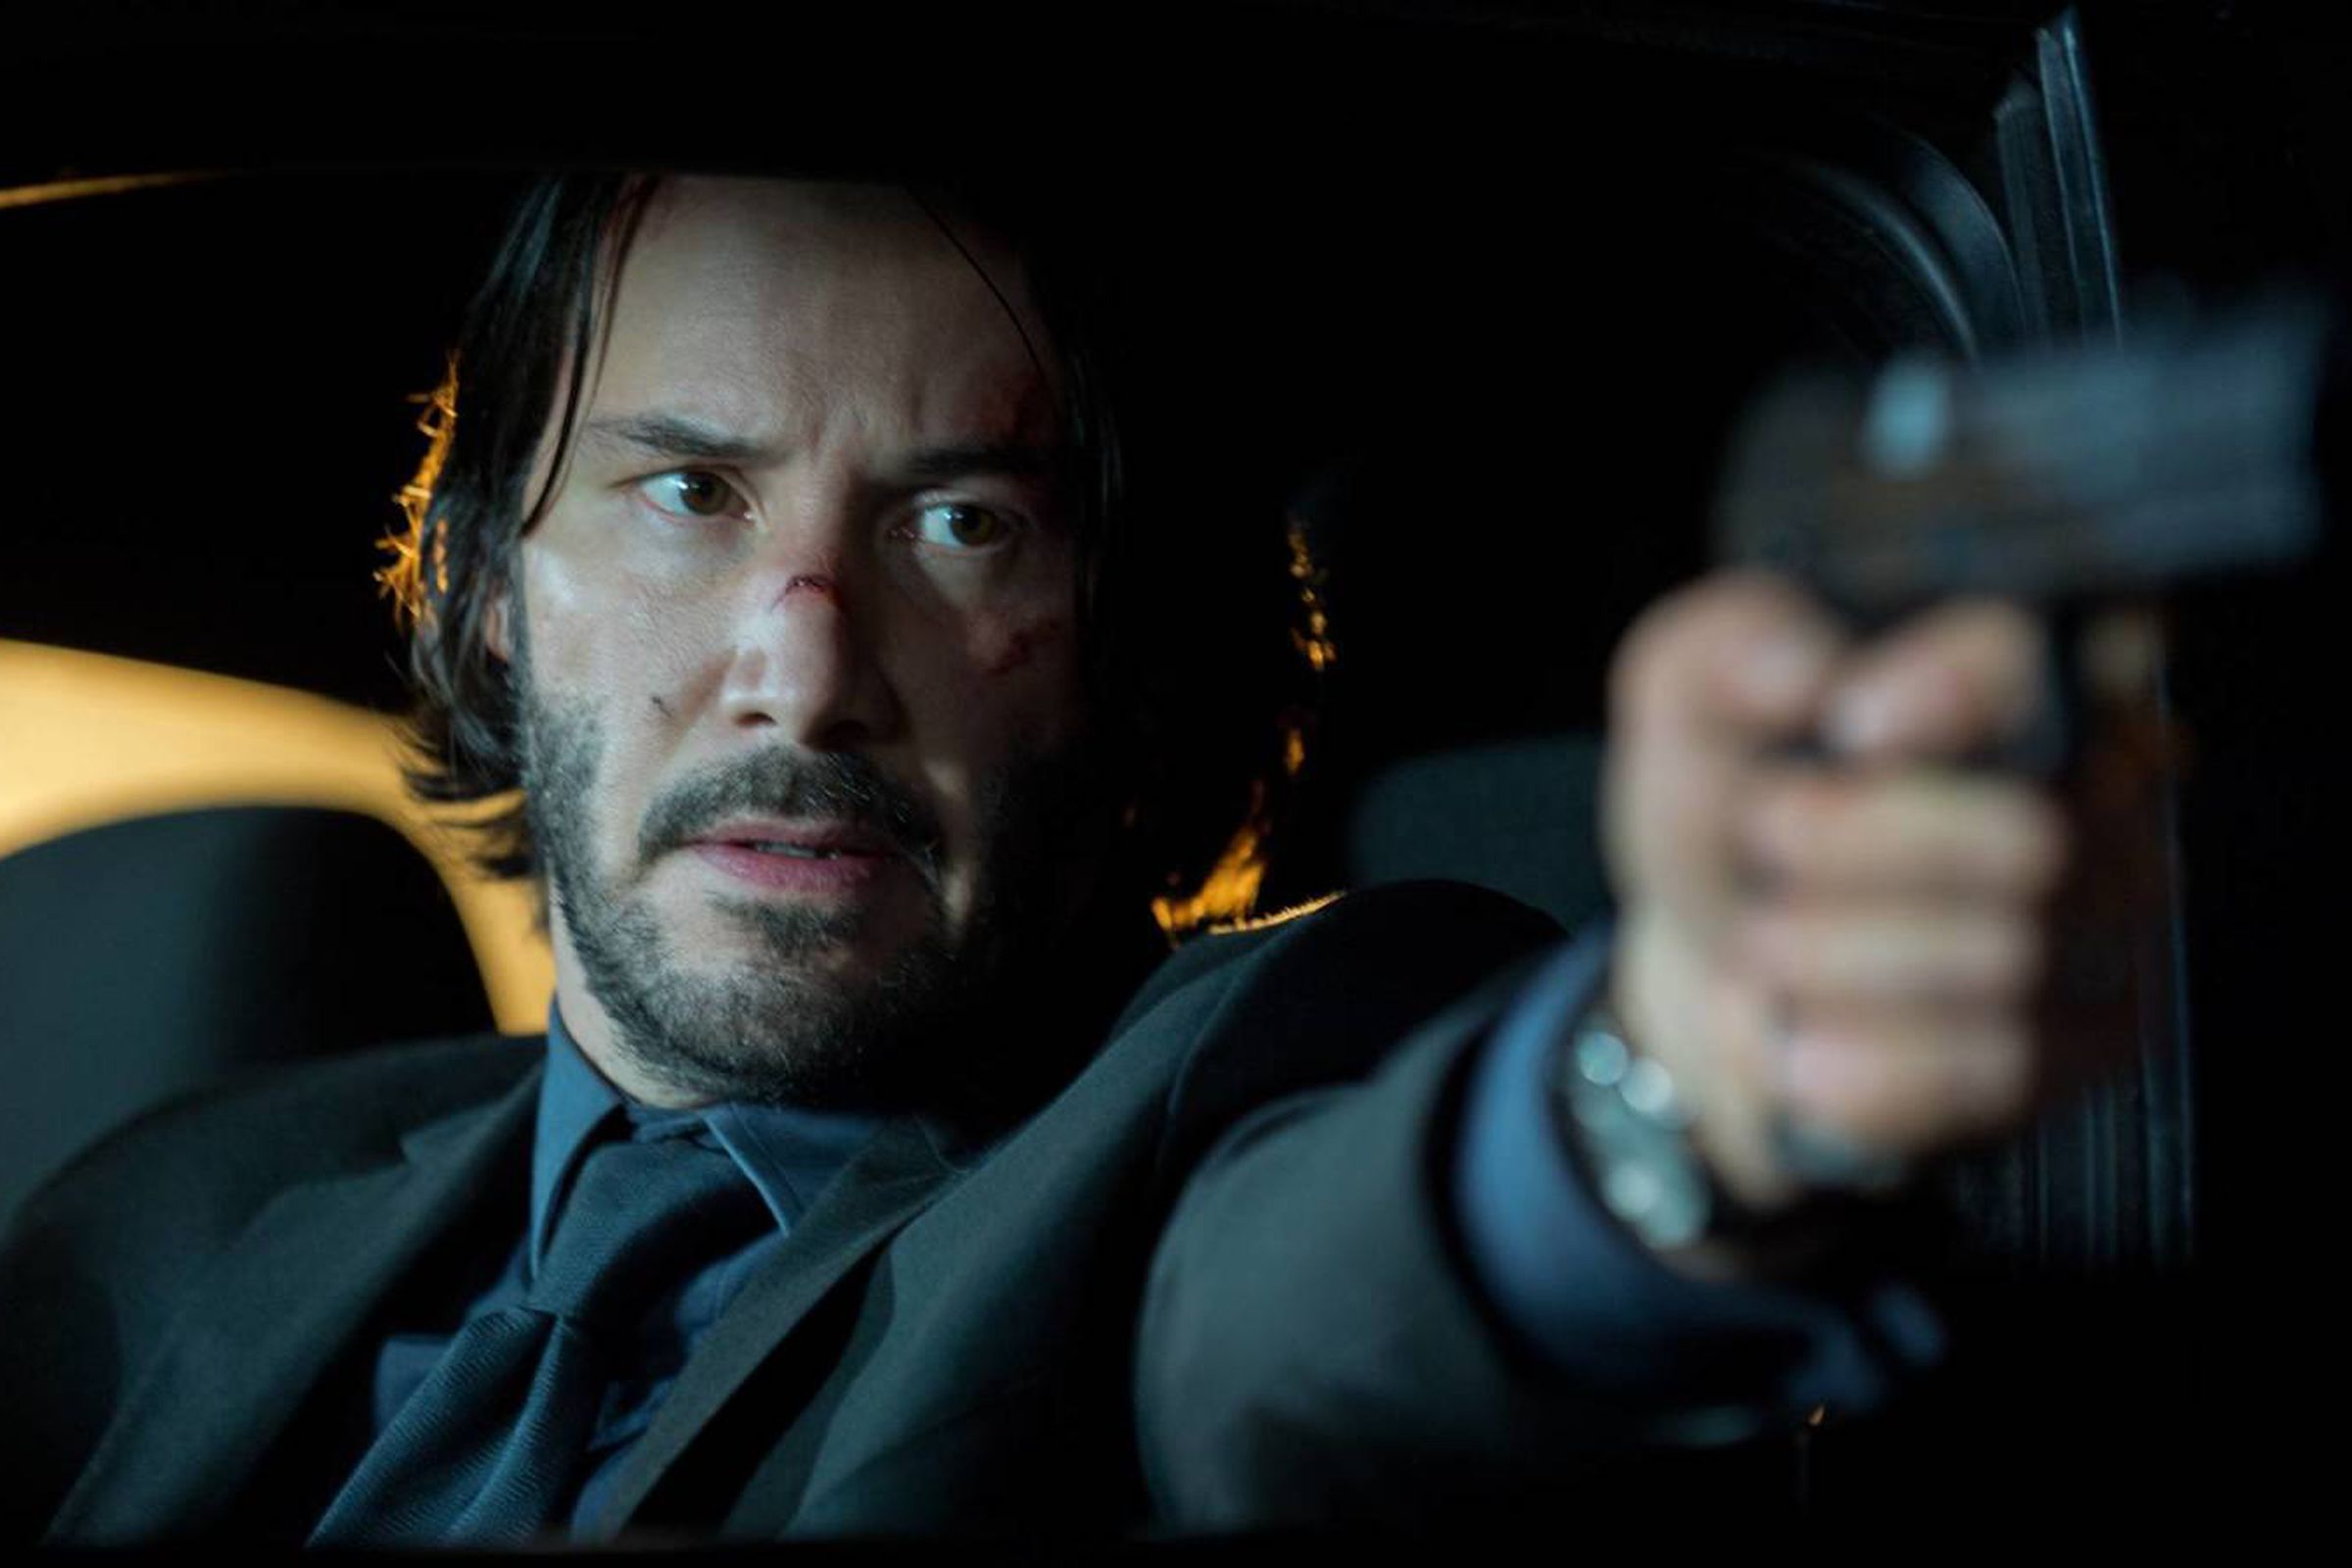 A man in a suit sitting in a car and pointing a gun out the window.